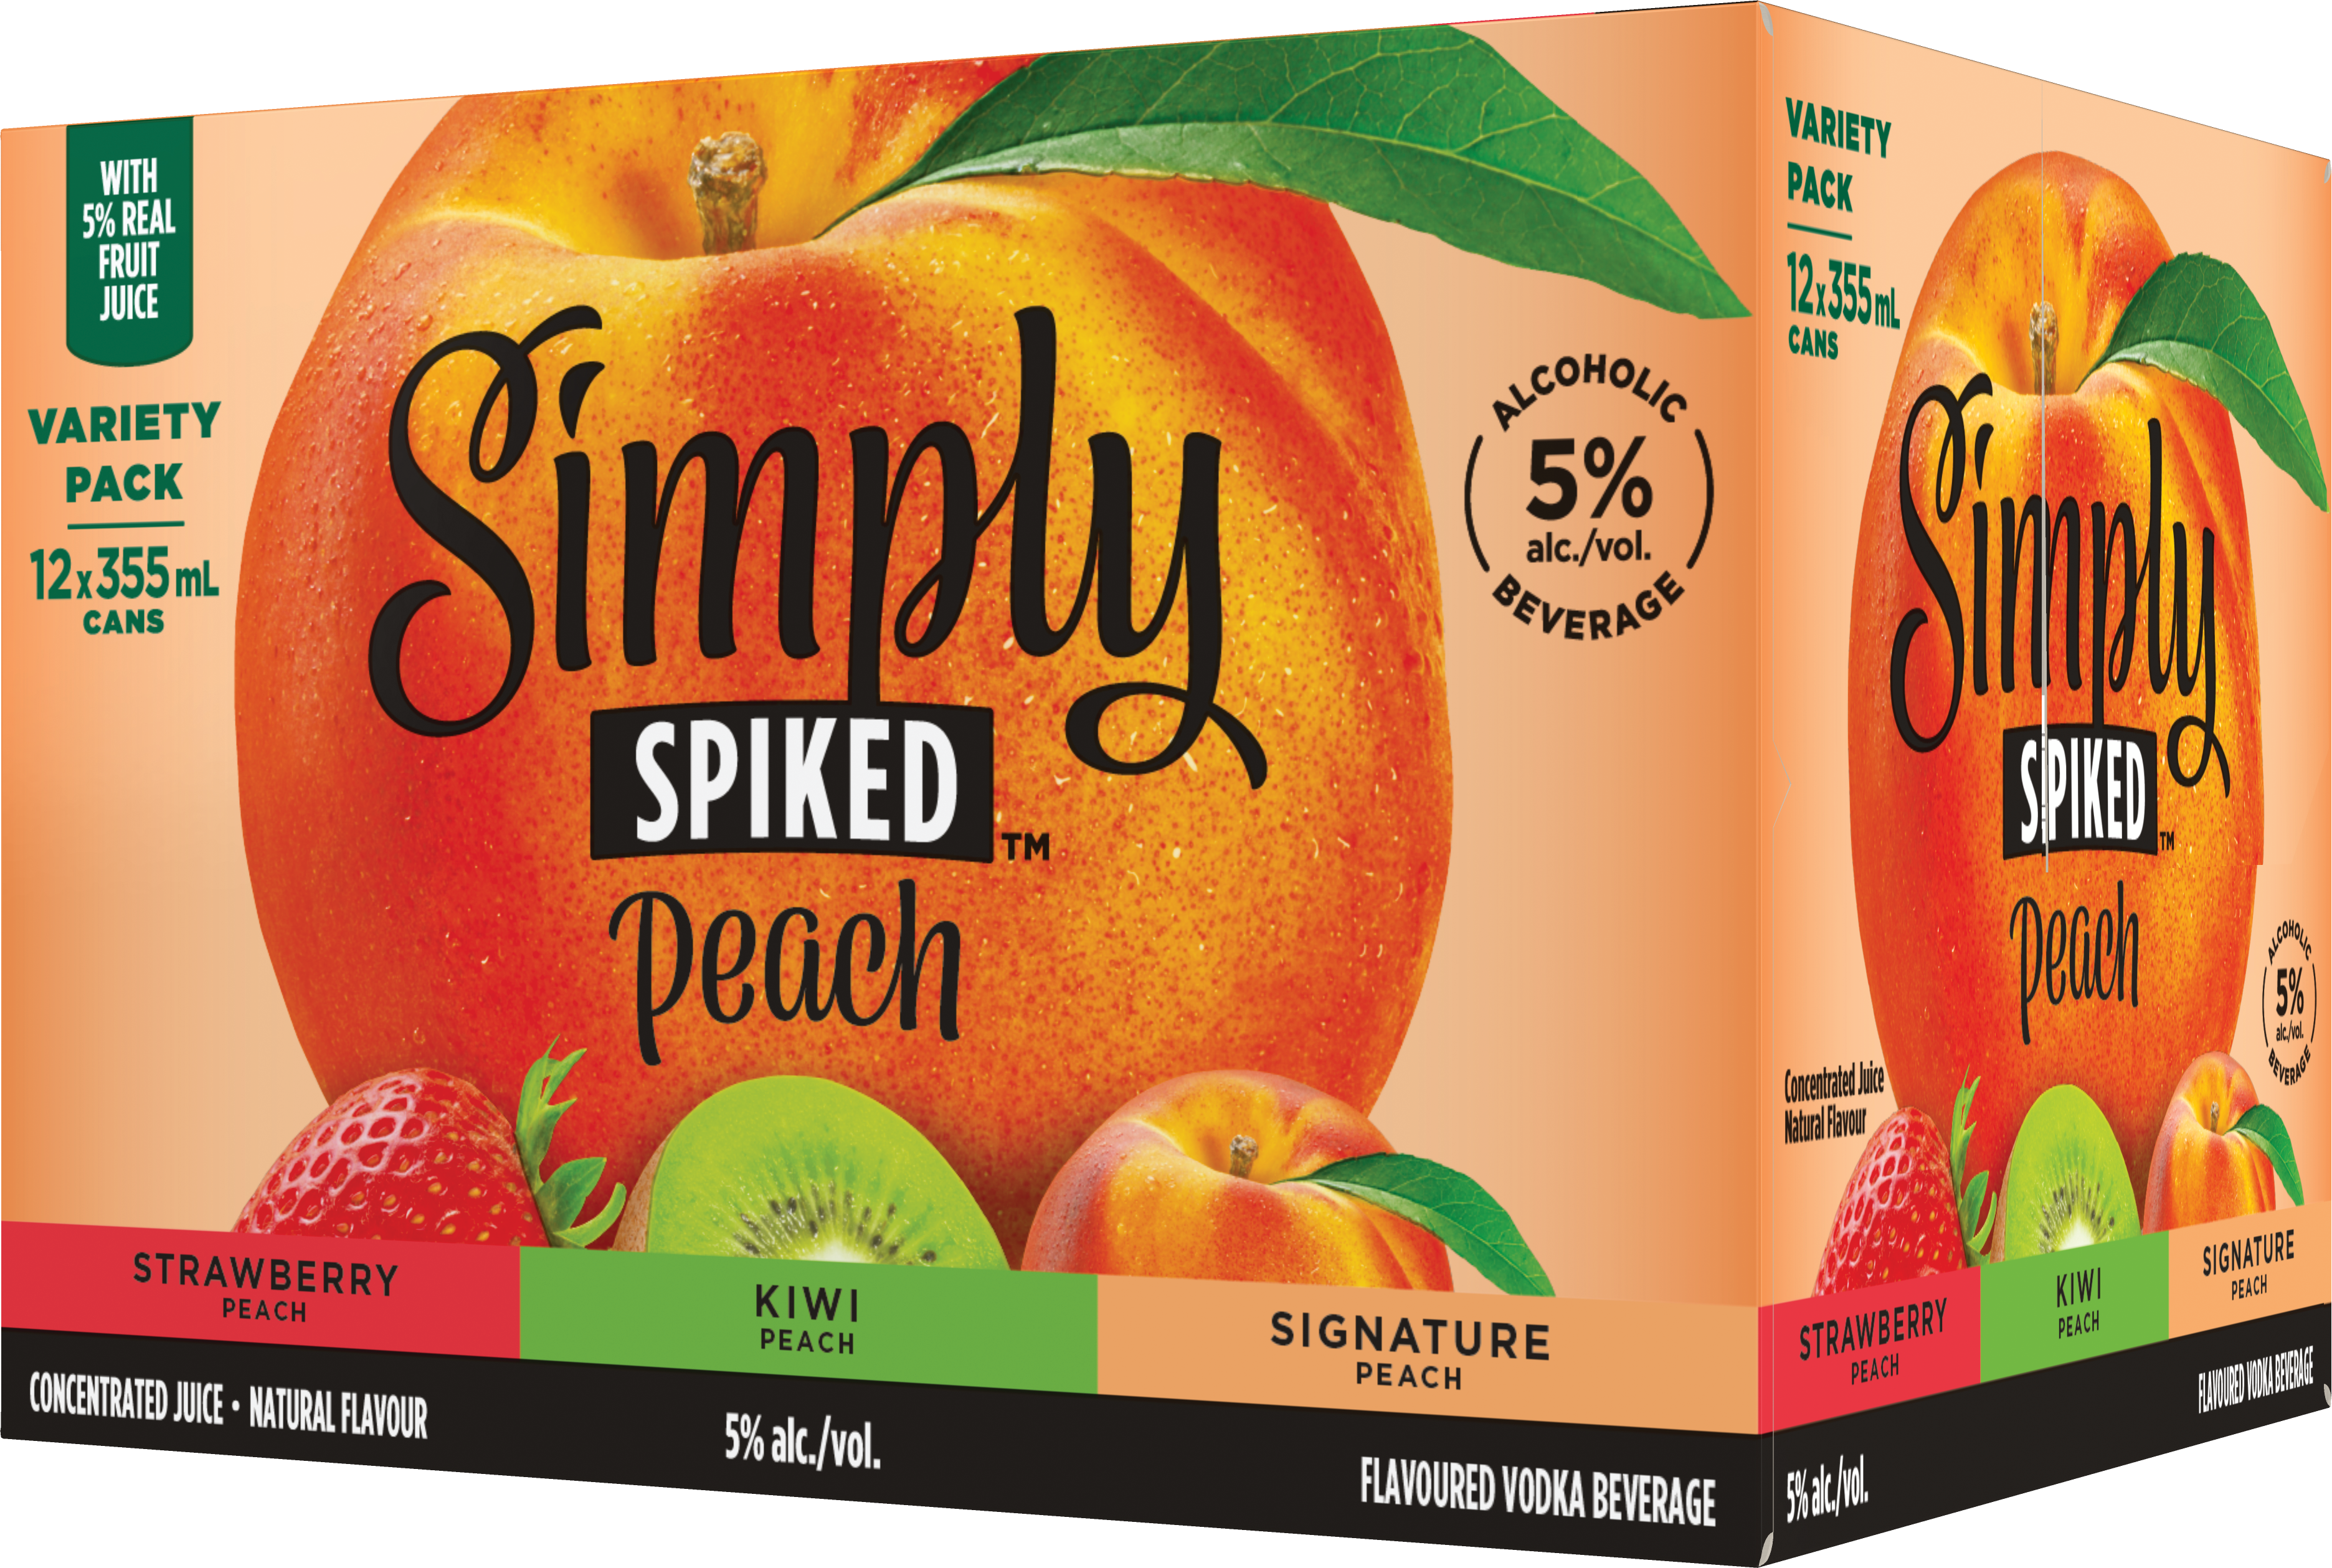 Packaging of Simply Spiked Peach beverage with three flavor variants: Strawberry, Kiwi, and Signature Peach